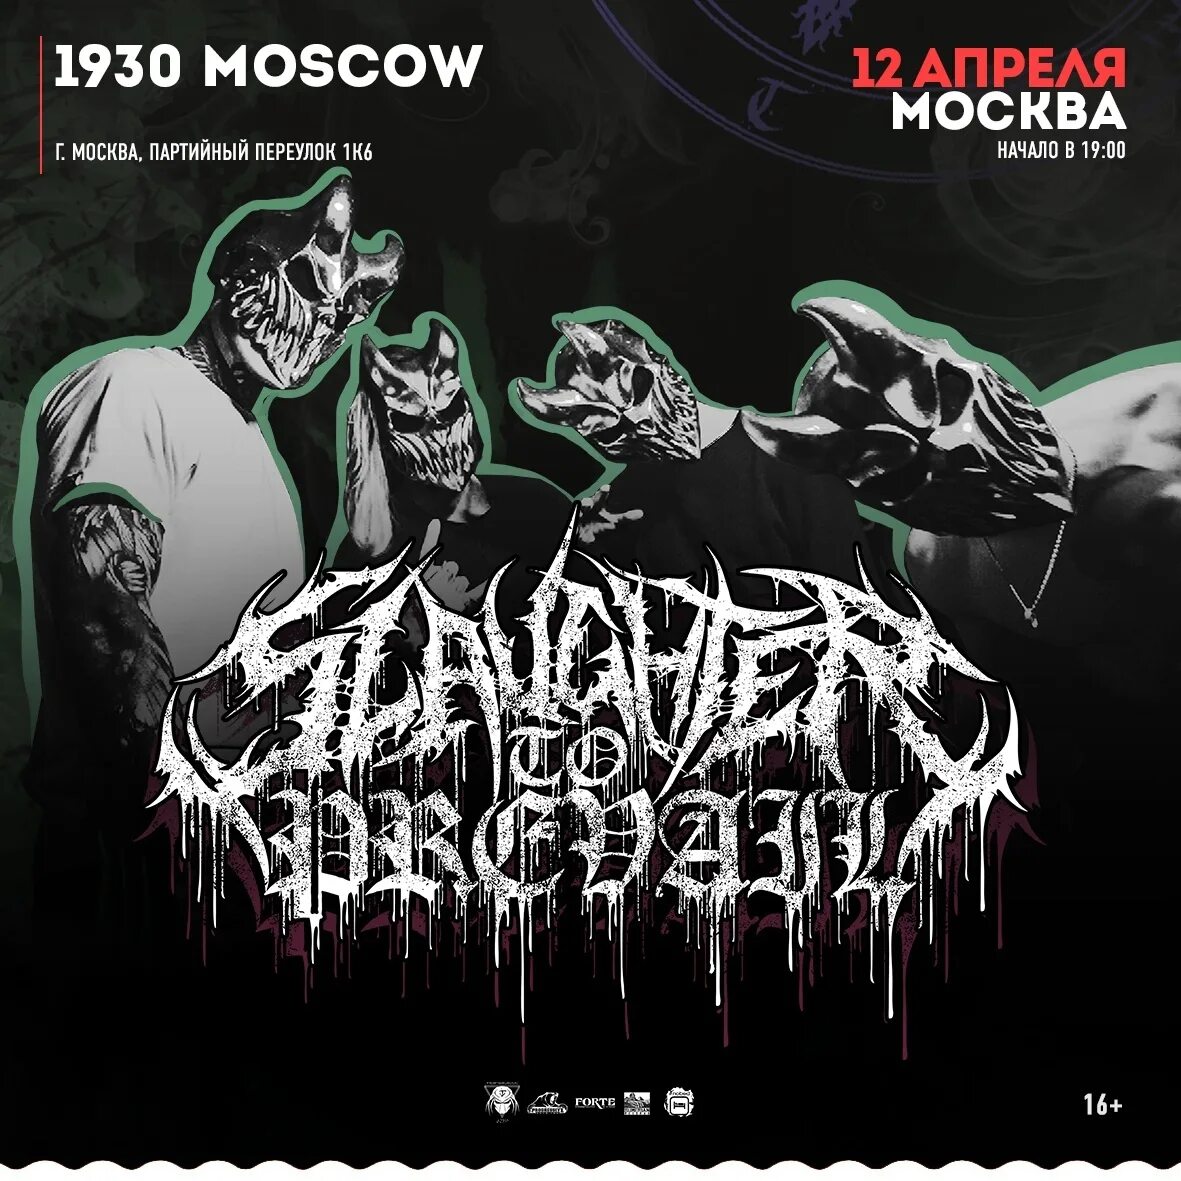 Slaughter to Prevail концерт. Slaughter to Prevail старые концерты. Slaughter to prevail demolisher